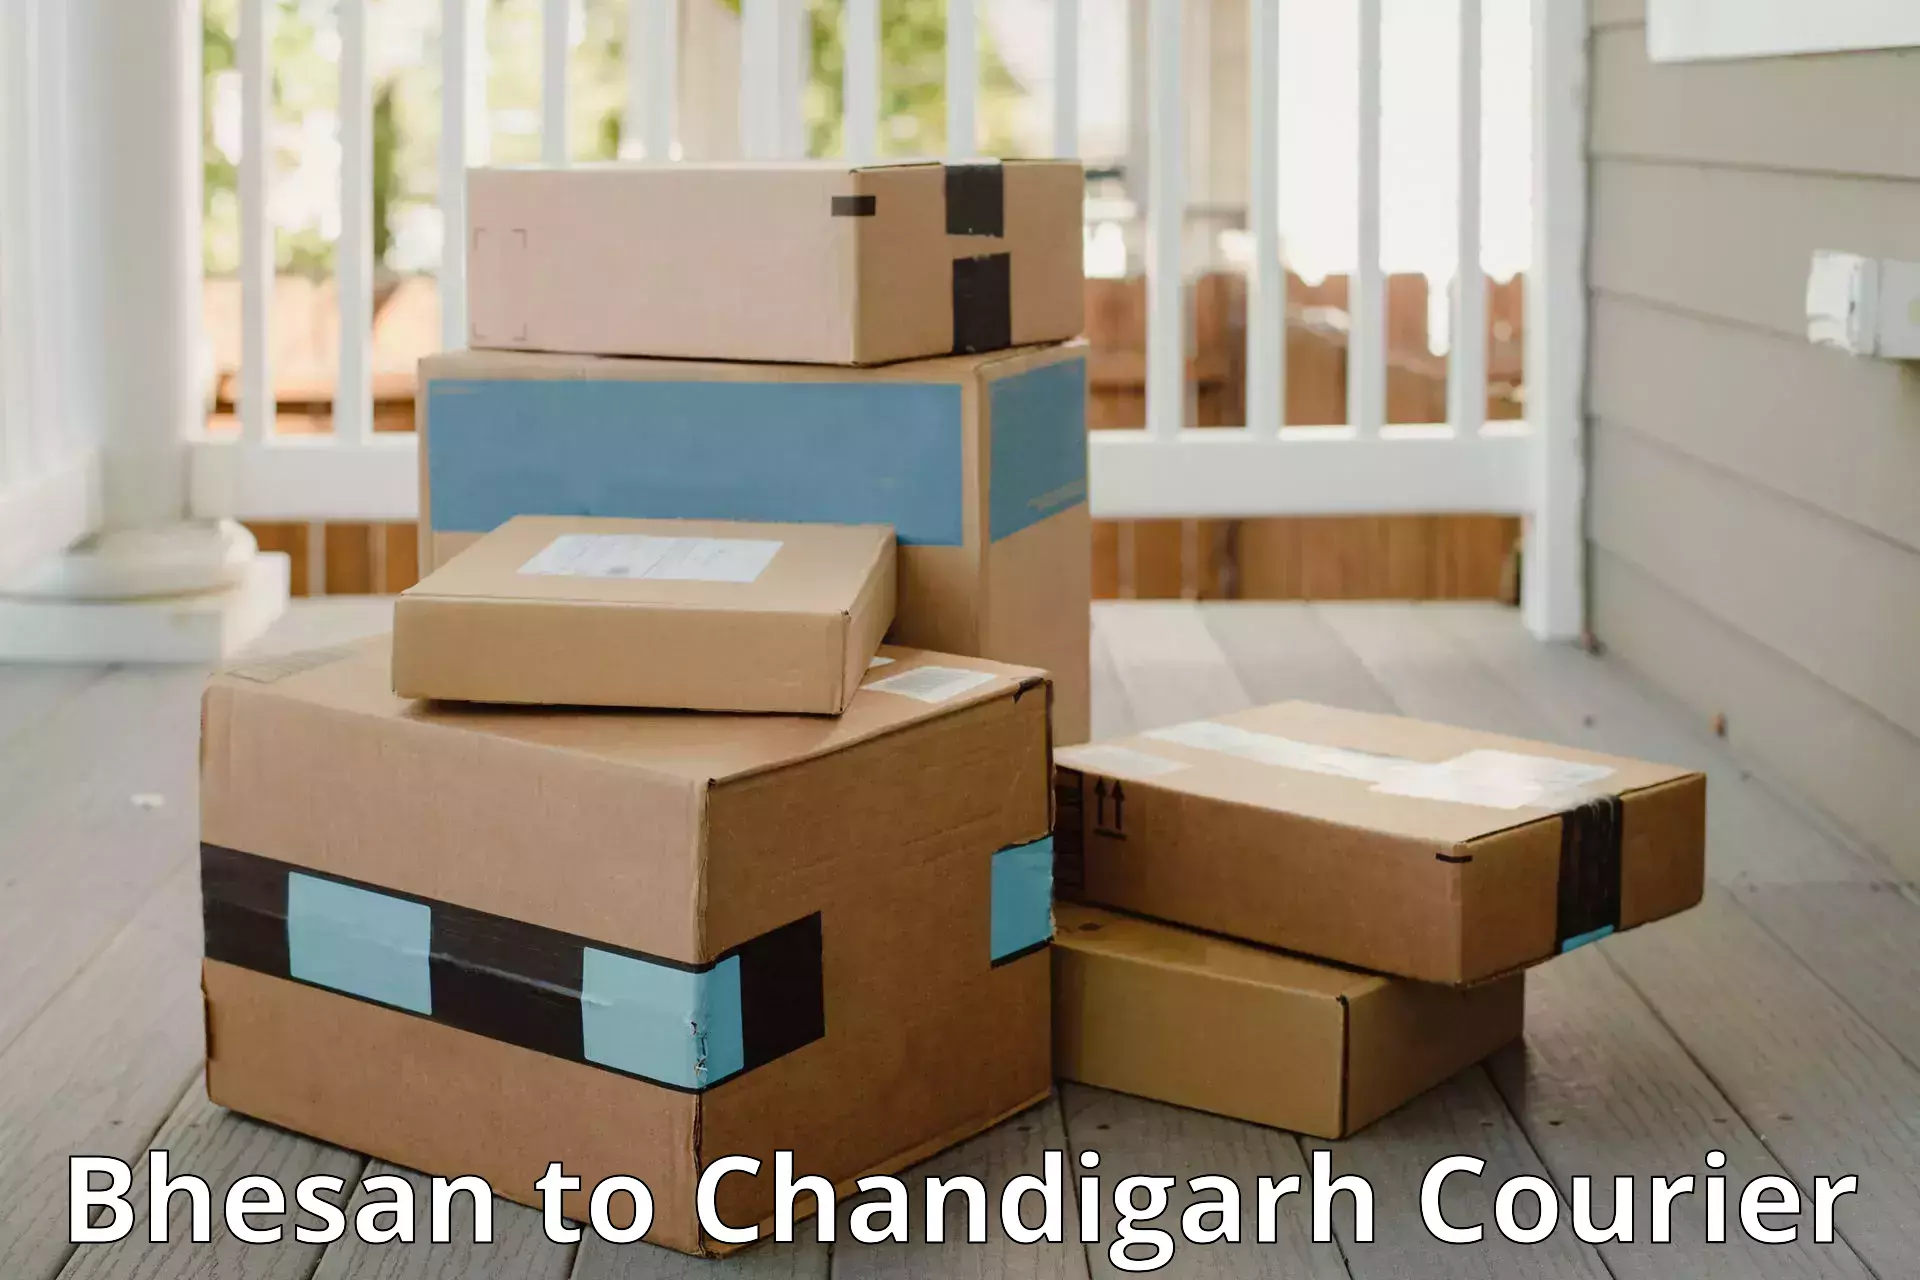 Luggage delivery app Bhesan to Chandigarh